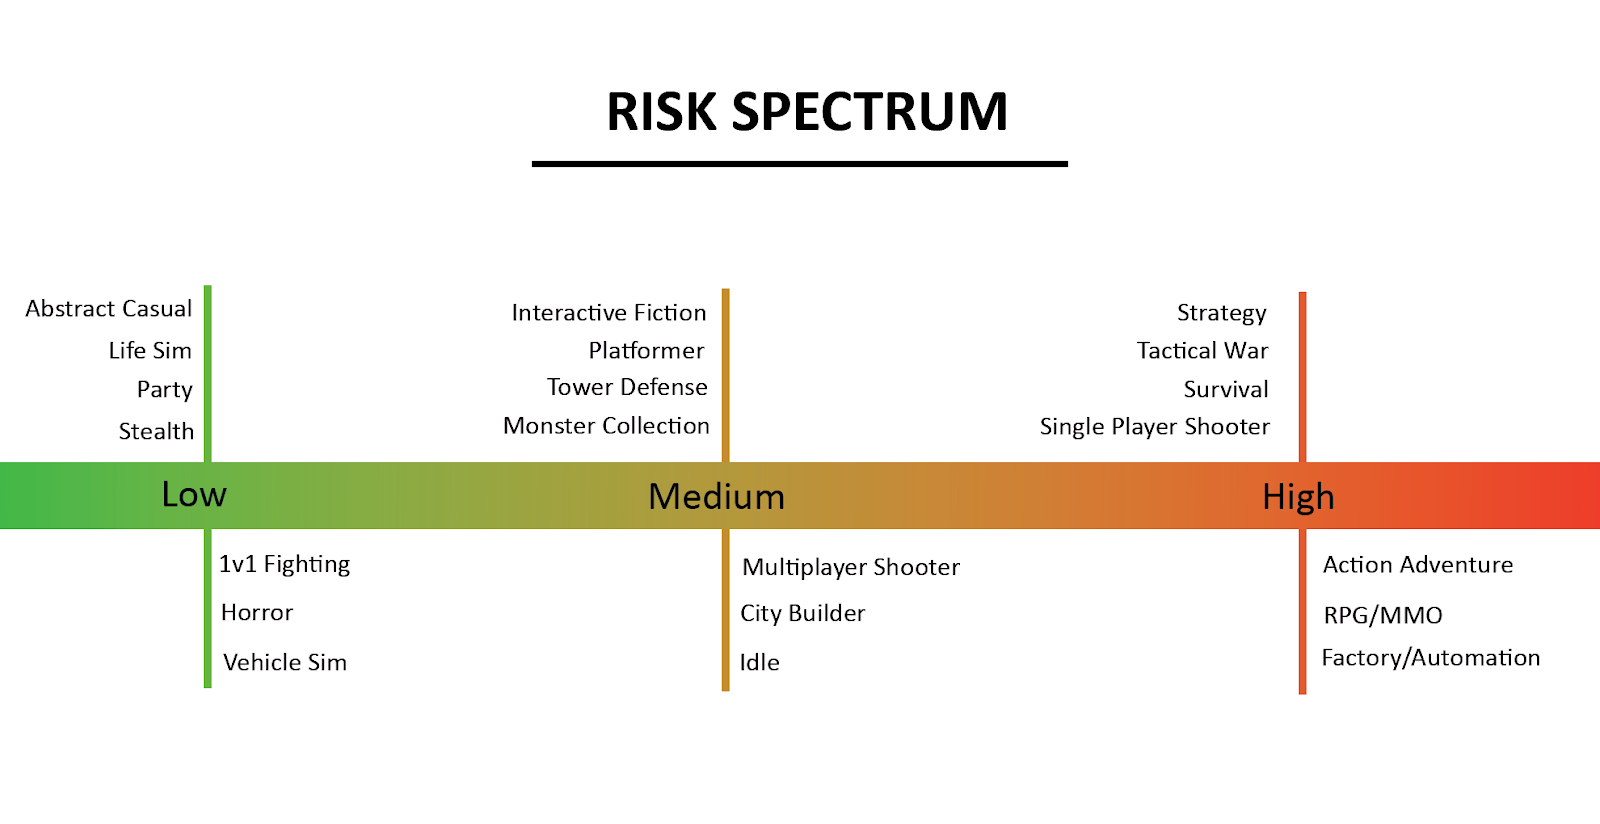 Image of the The Risk Spectrum, a visual representation of game genres categorized by the level of risk towards colonial values